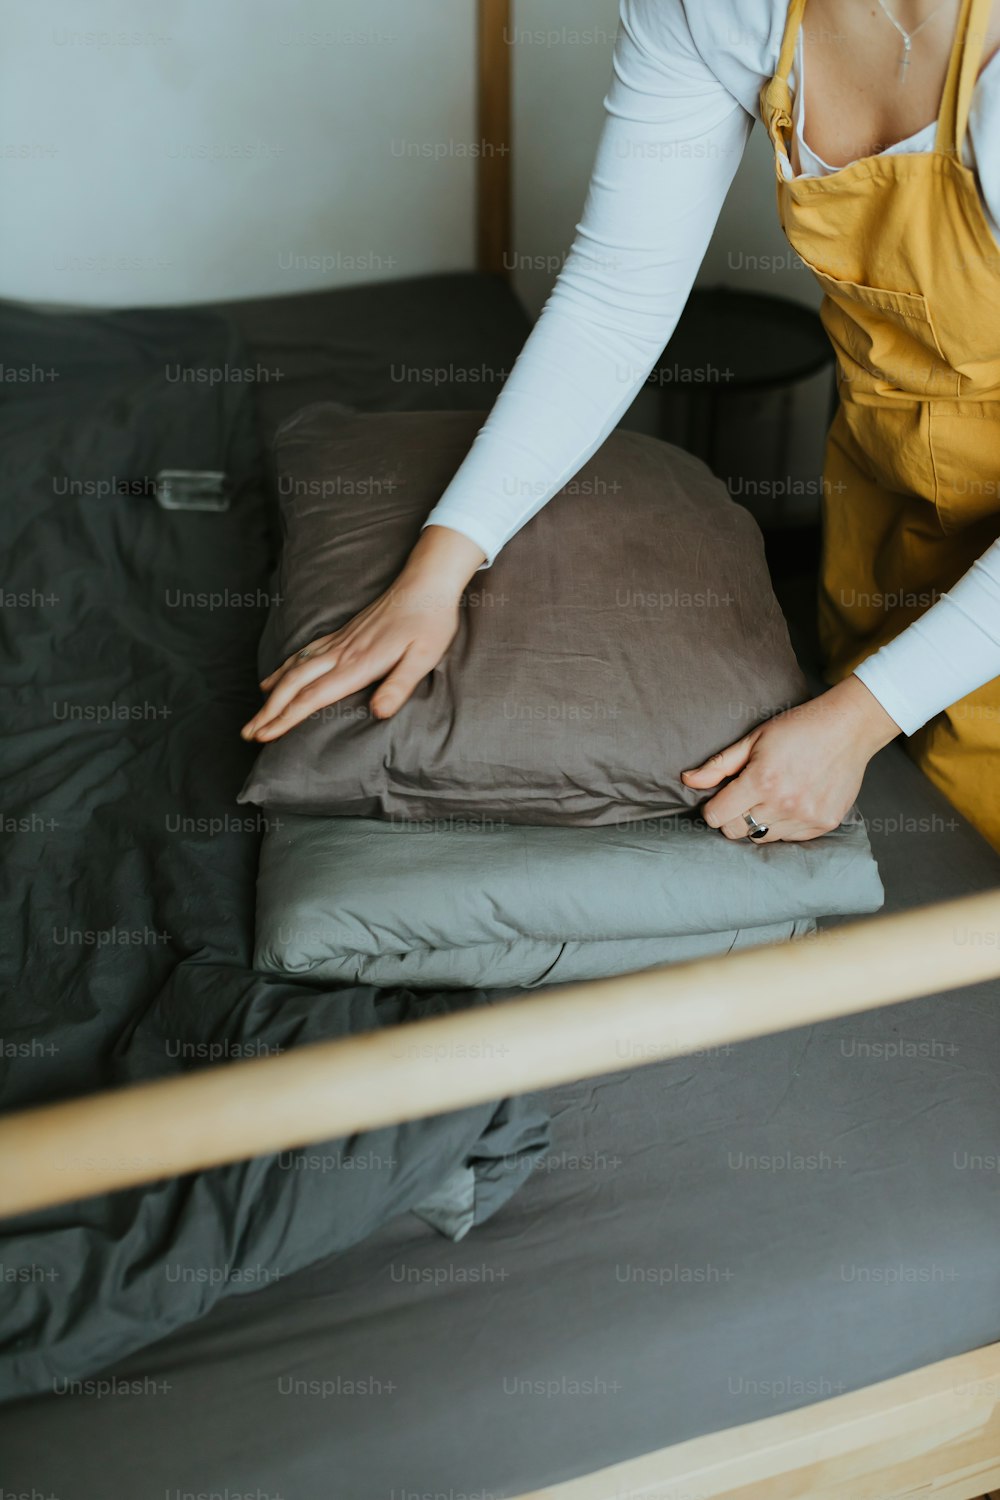 a woman in a yellow dress is putting a pillow on a bed